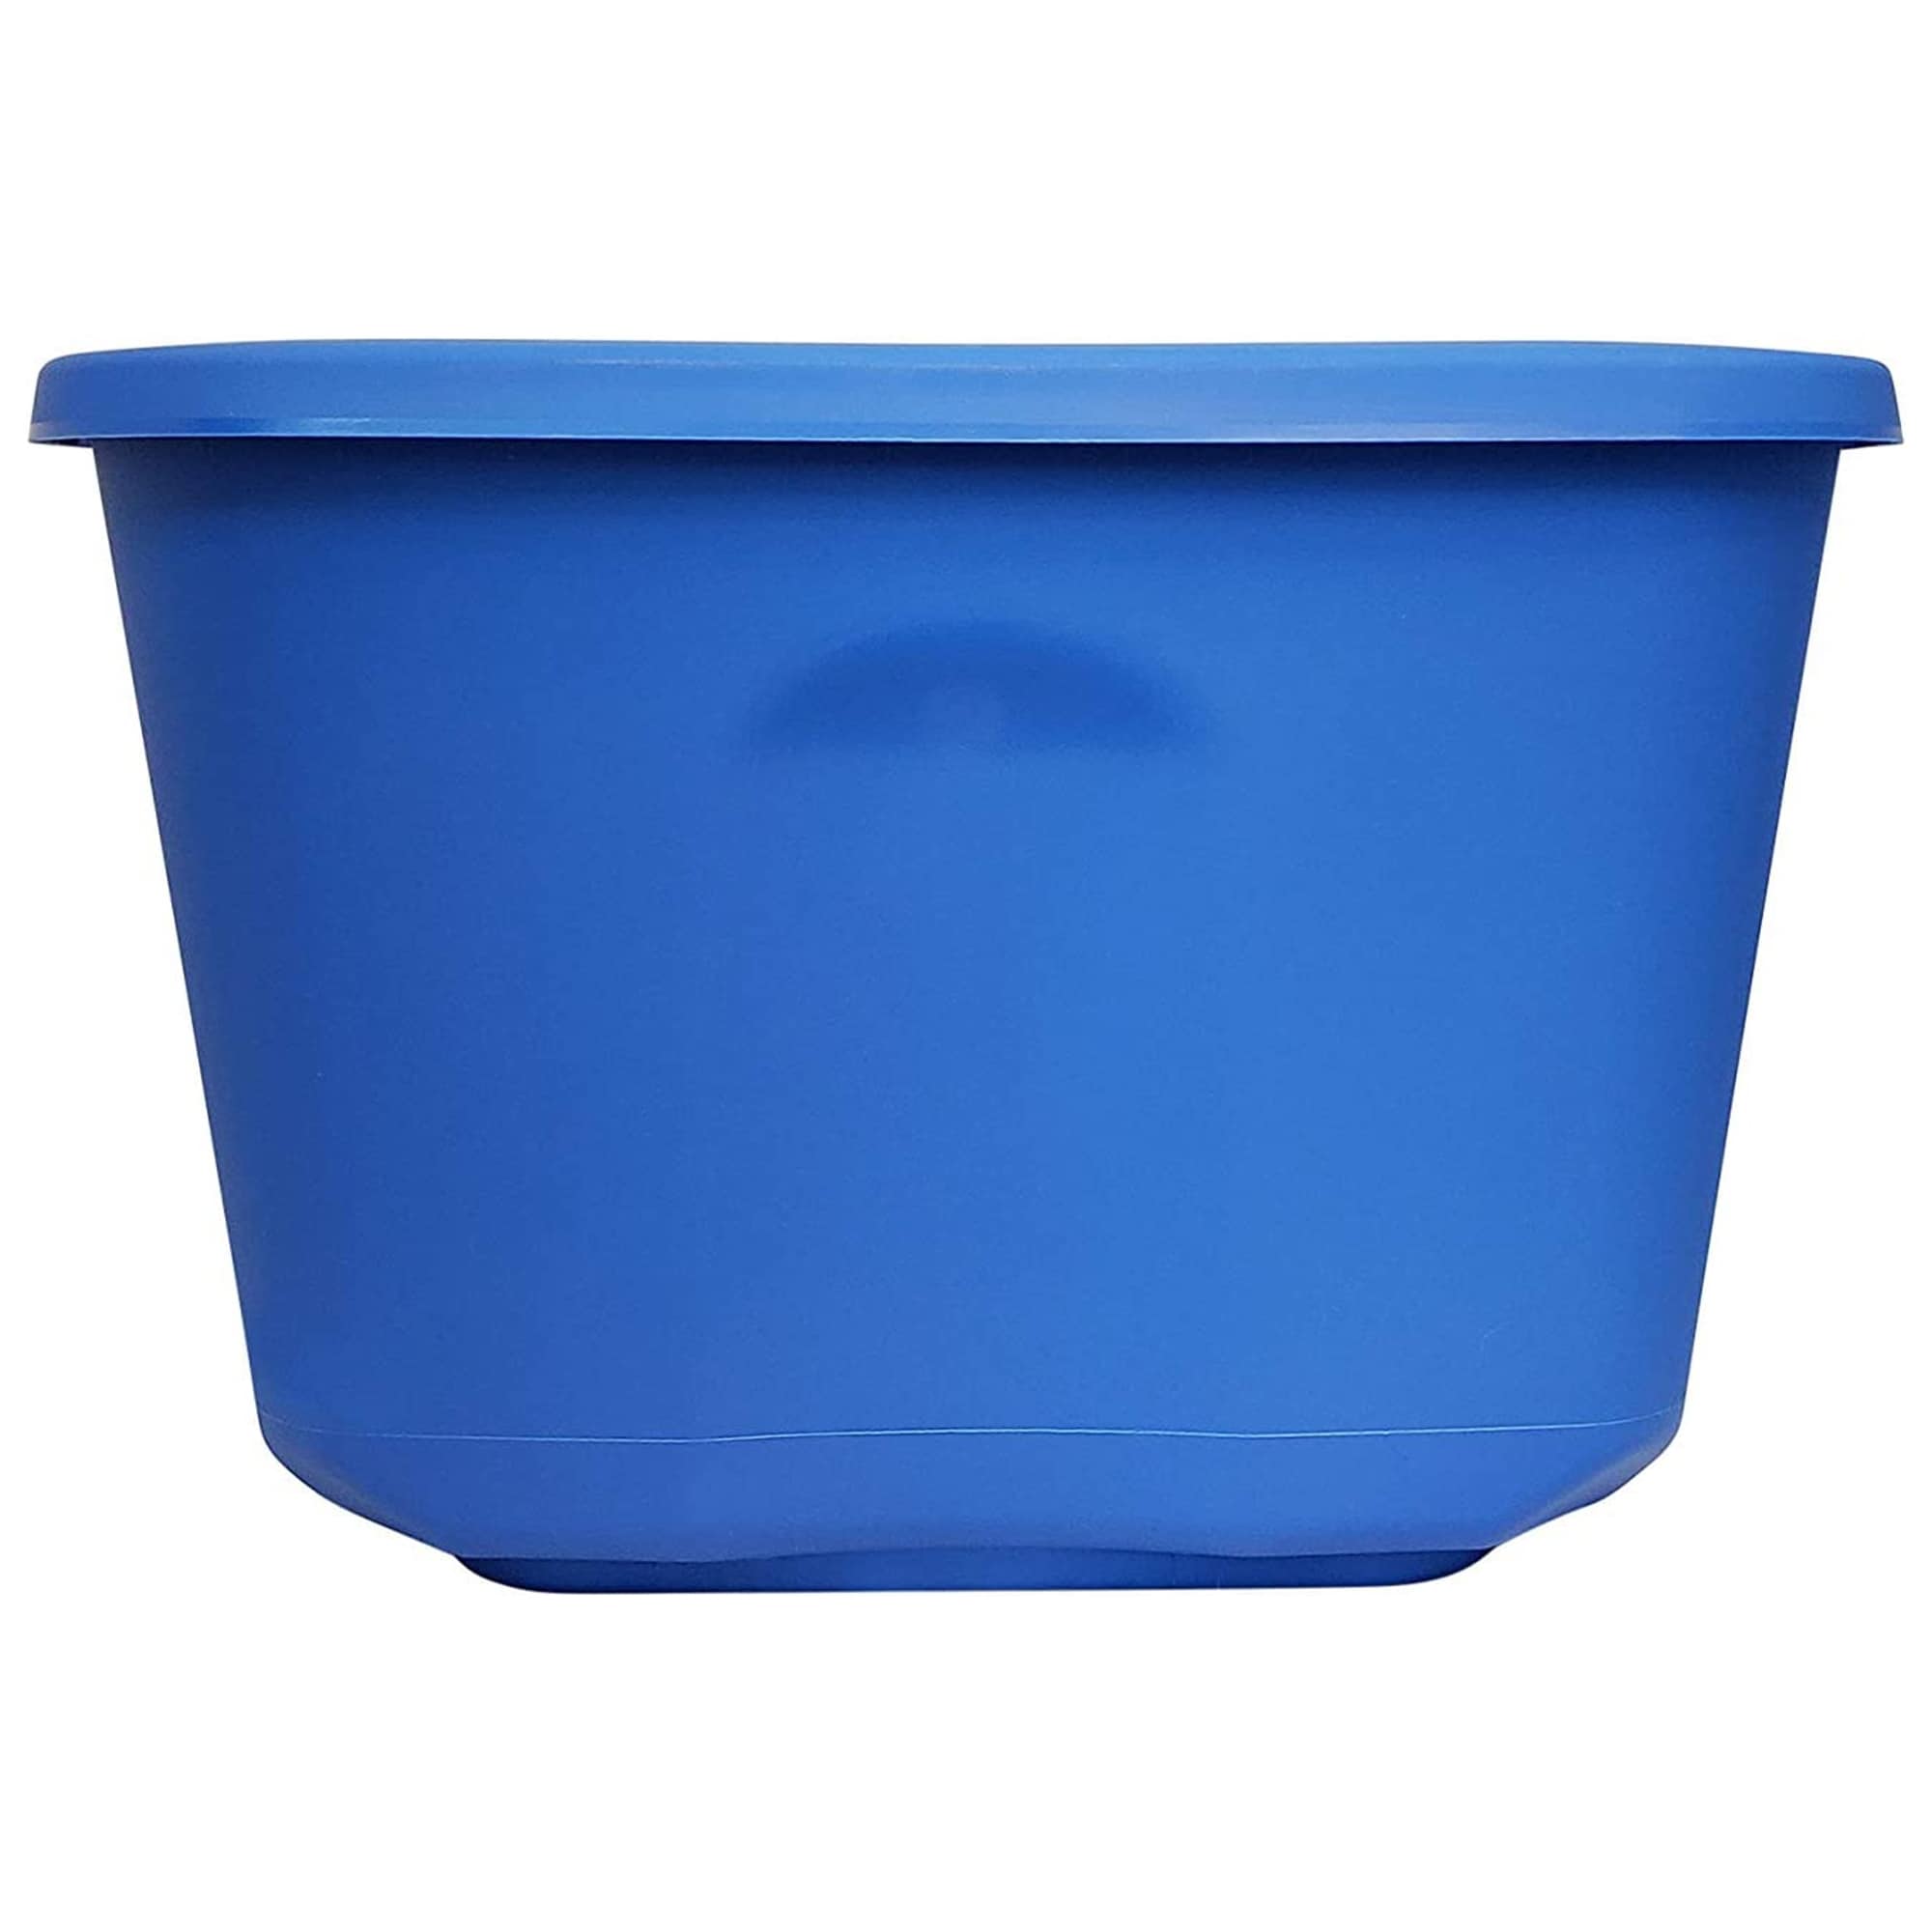 https://ak1.ostkcdn.com/images/products/is/images/direct/40763be839d9d6ebb08280f5e3af813b1939a3a2/HOMZ-10-Gallon-Heavy-Duty-Plastic-Storage-Container%2C-Capri-Blue-%284-Pack%29.jpg